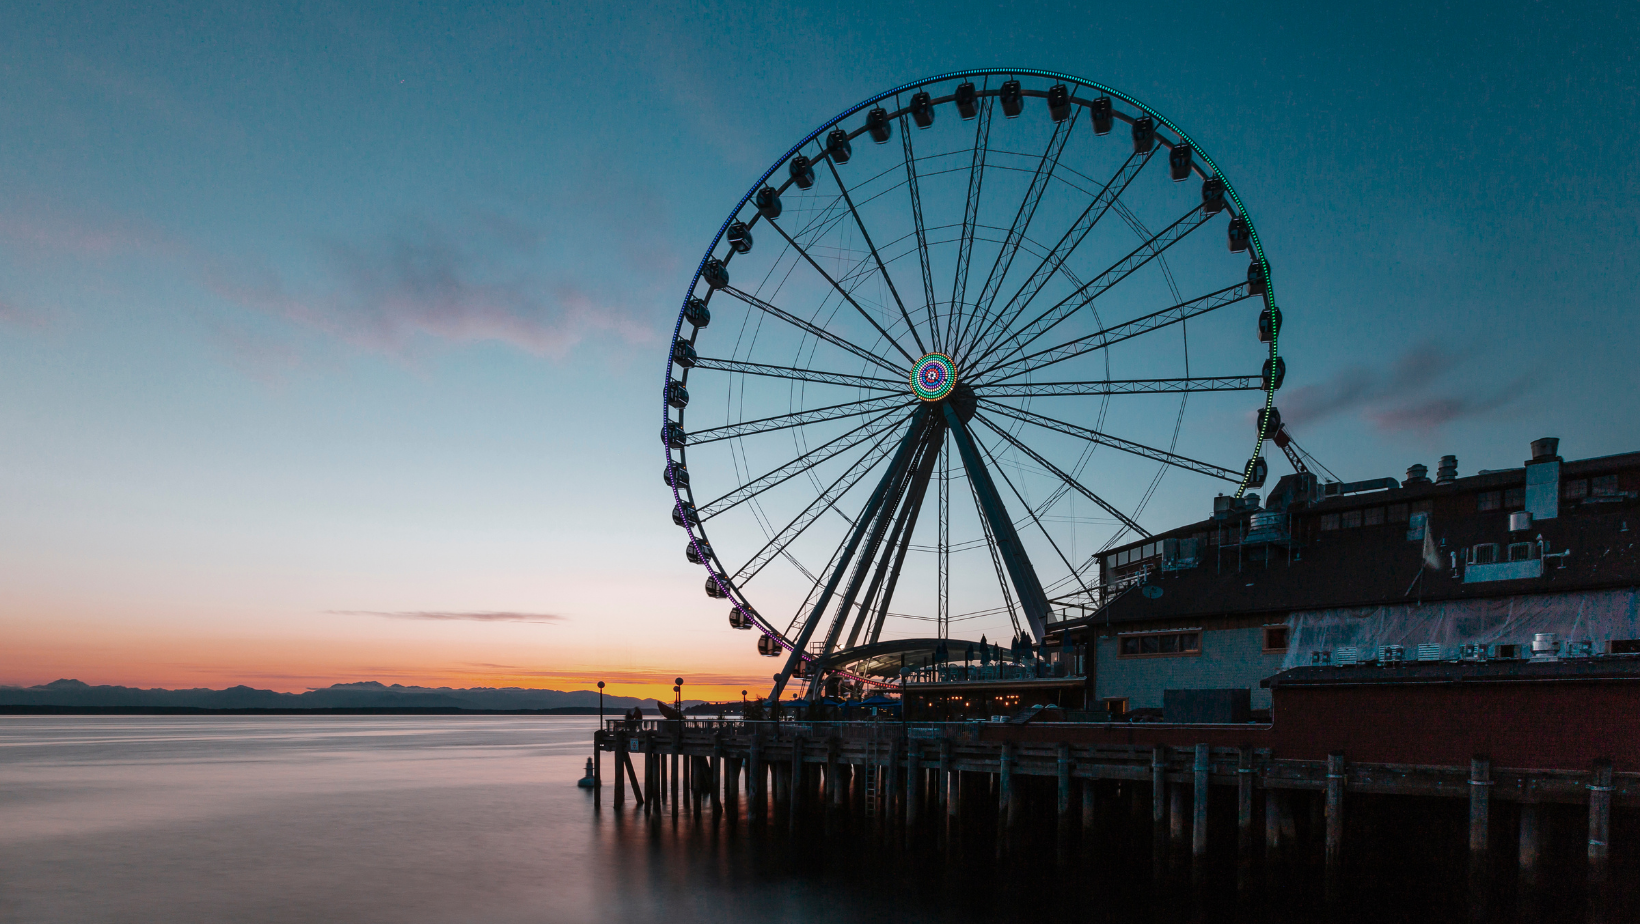 the ferris wheel in seattle on the waterfront